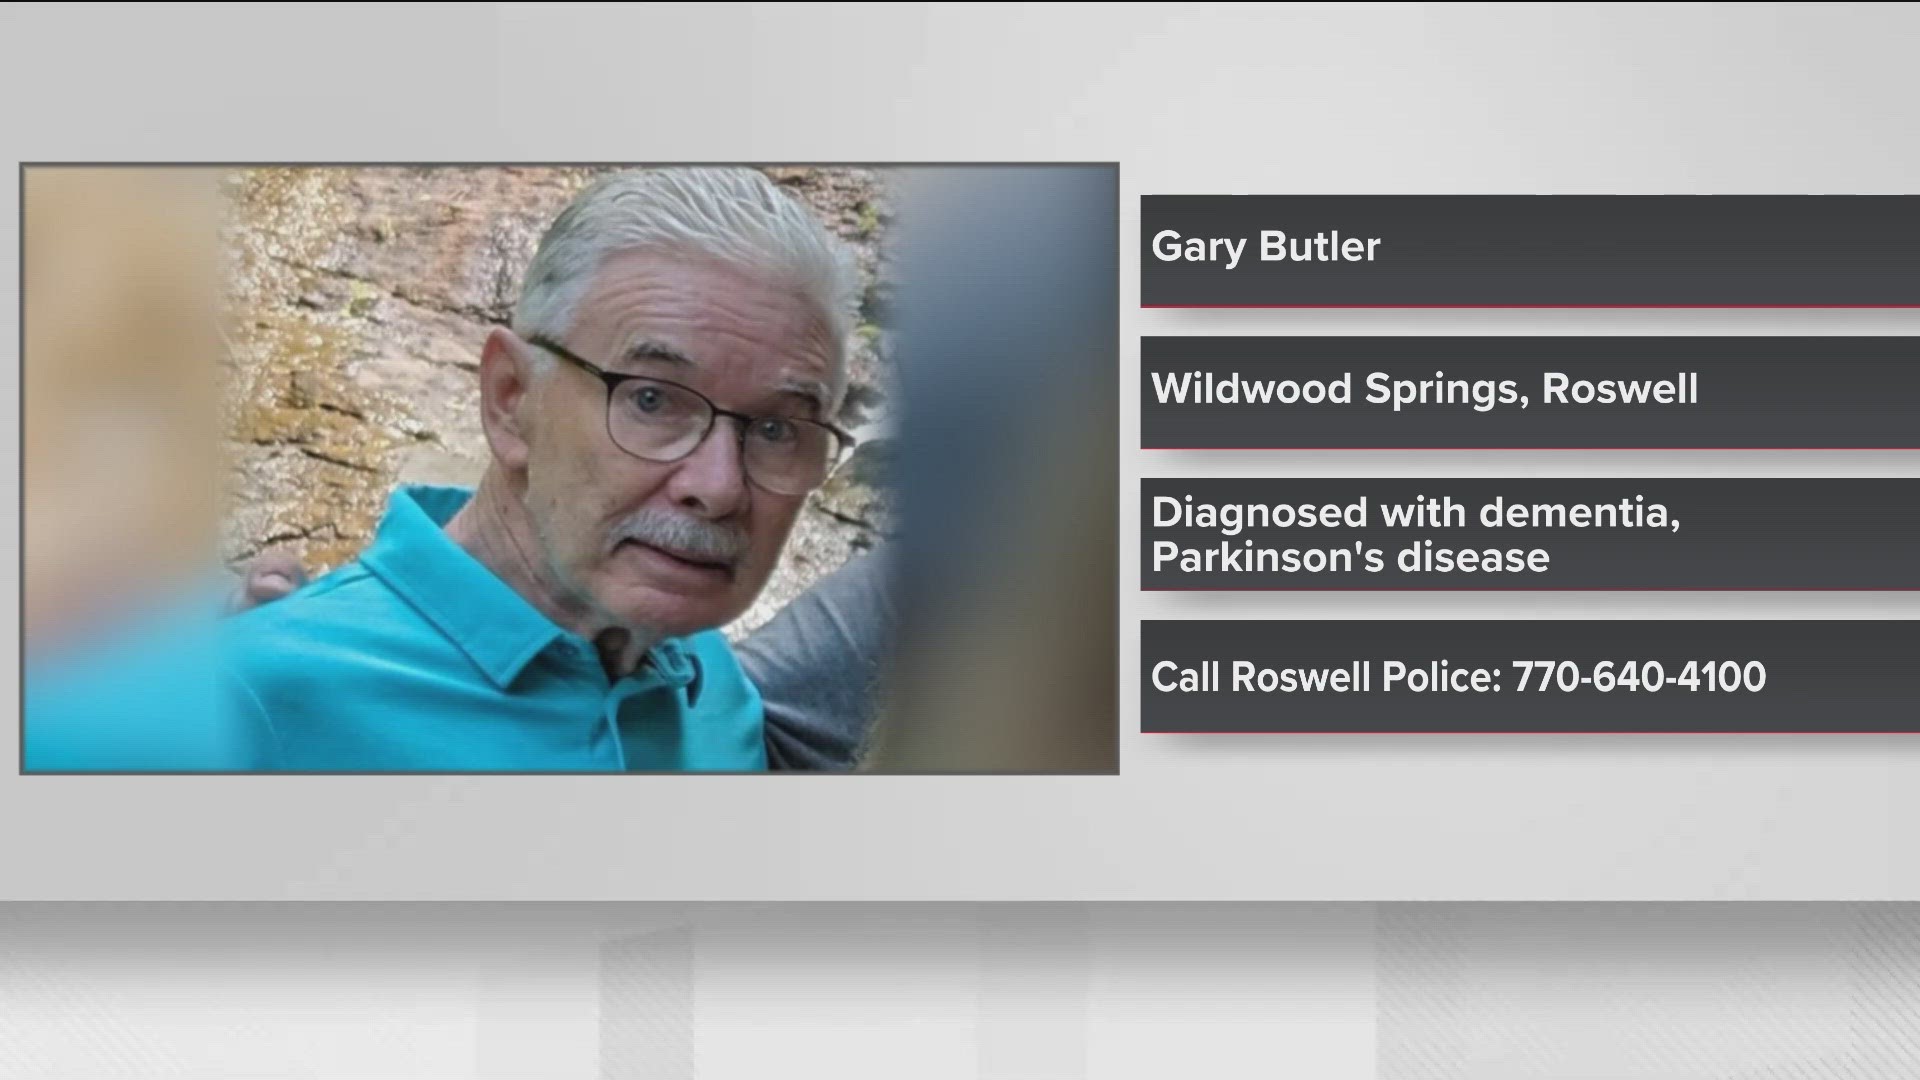 Gary Butler is believed to be walking in the Wildwood Springs area in Roswell.